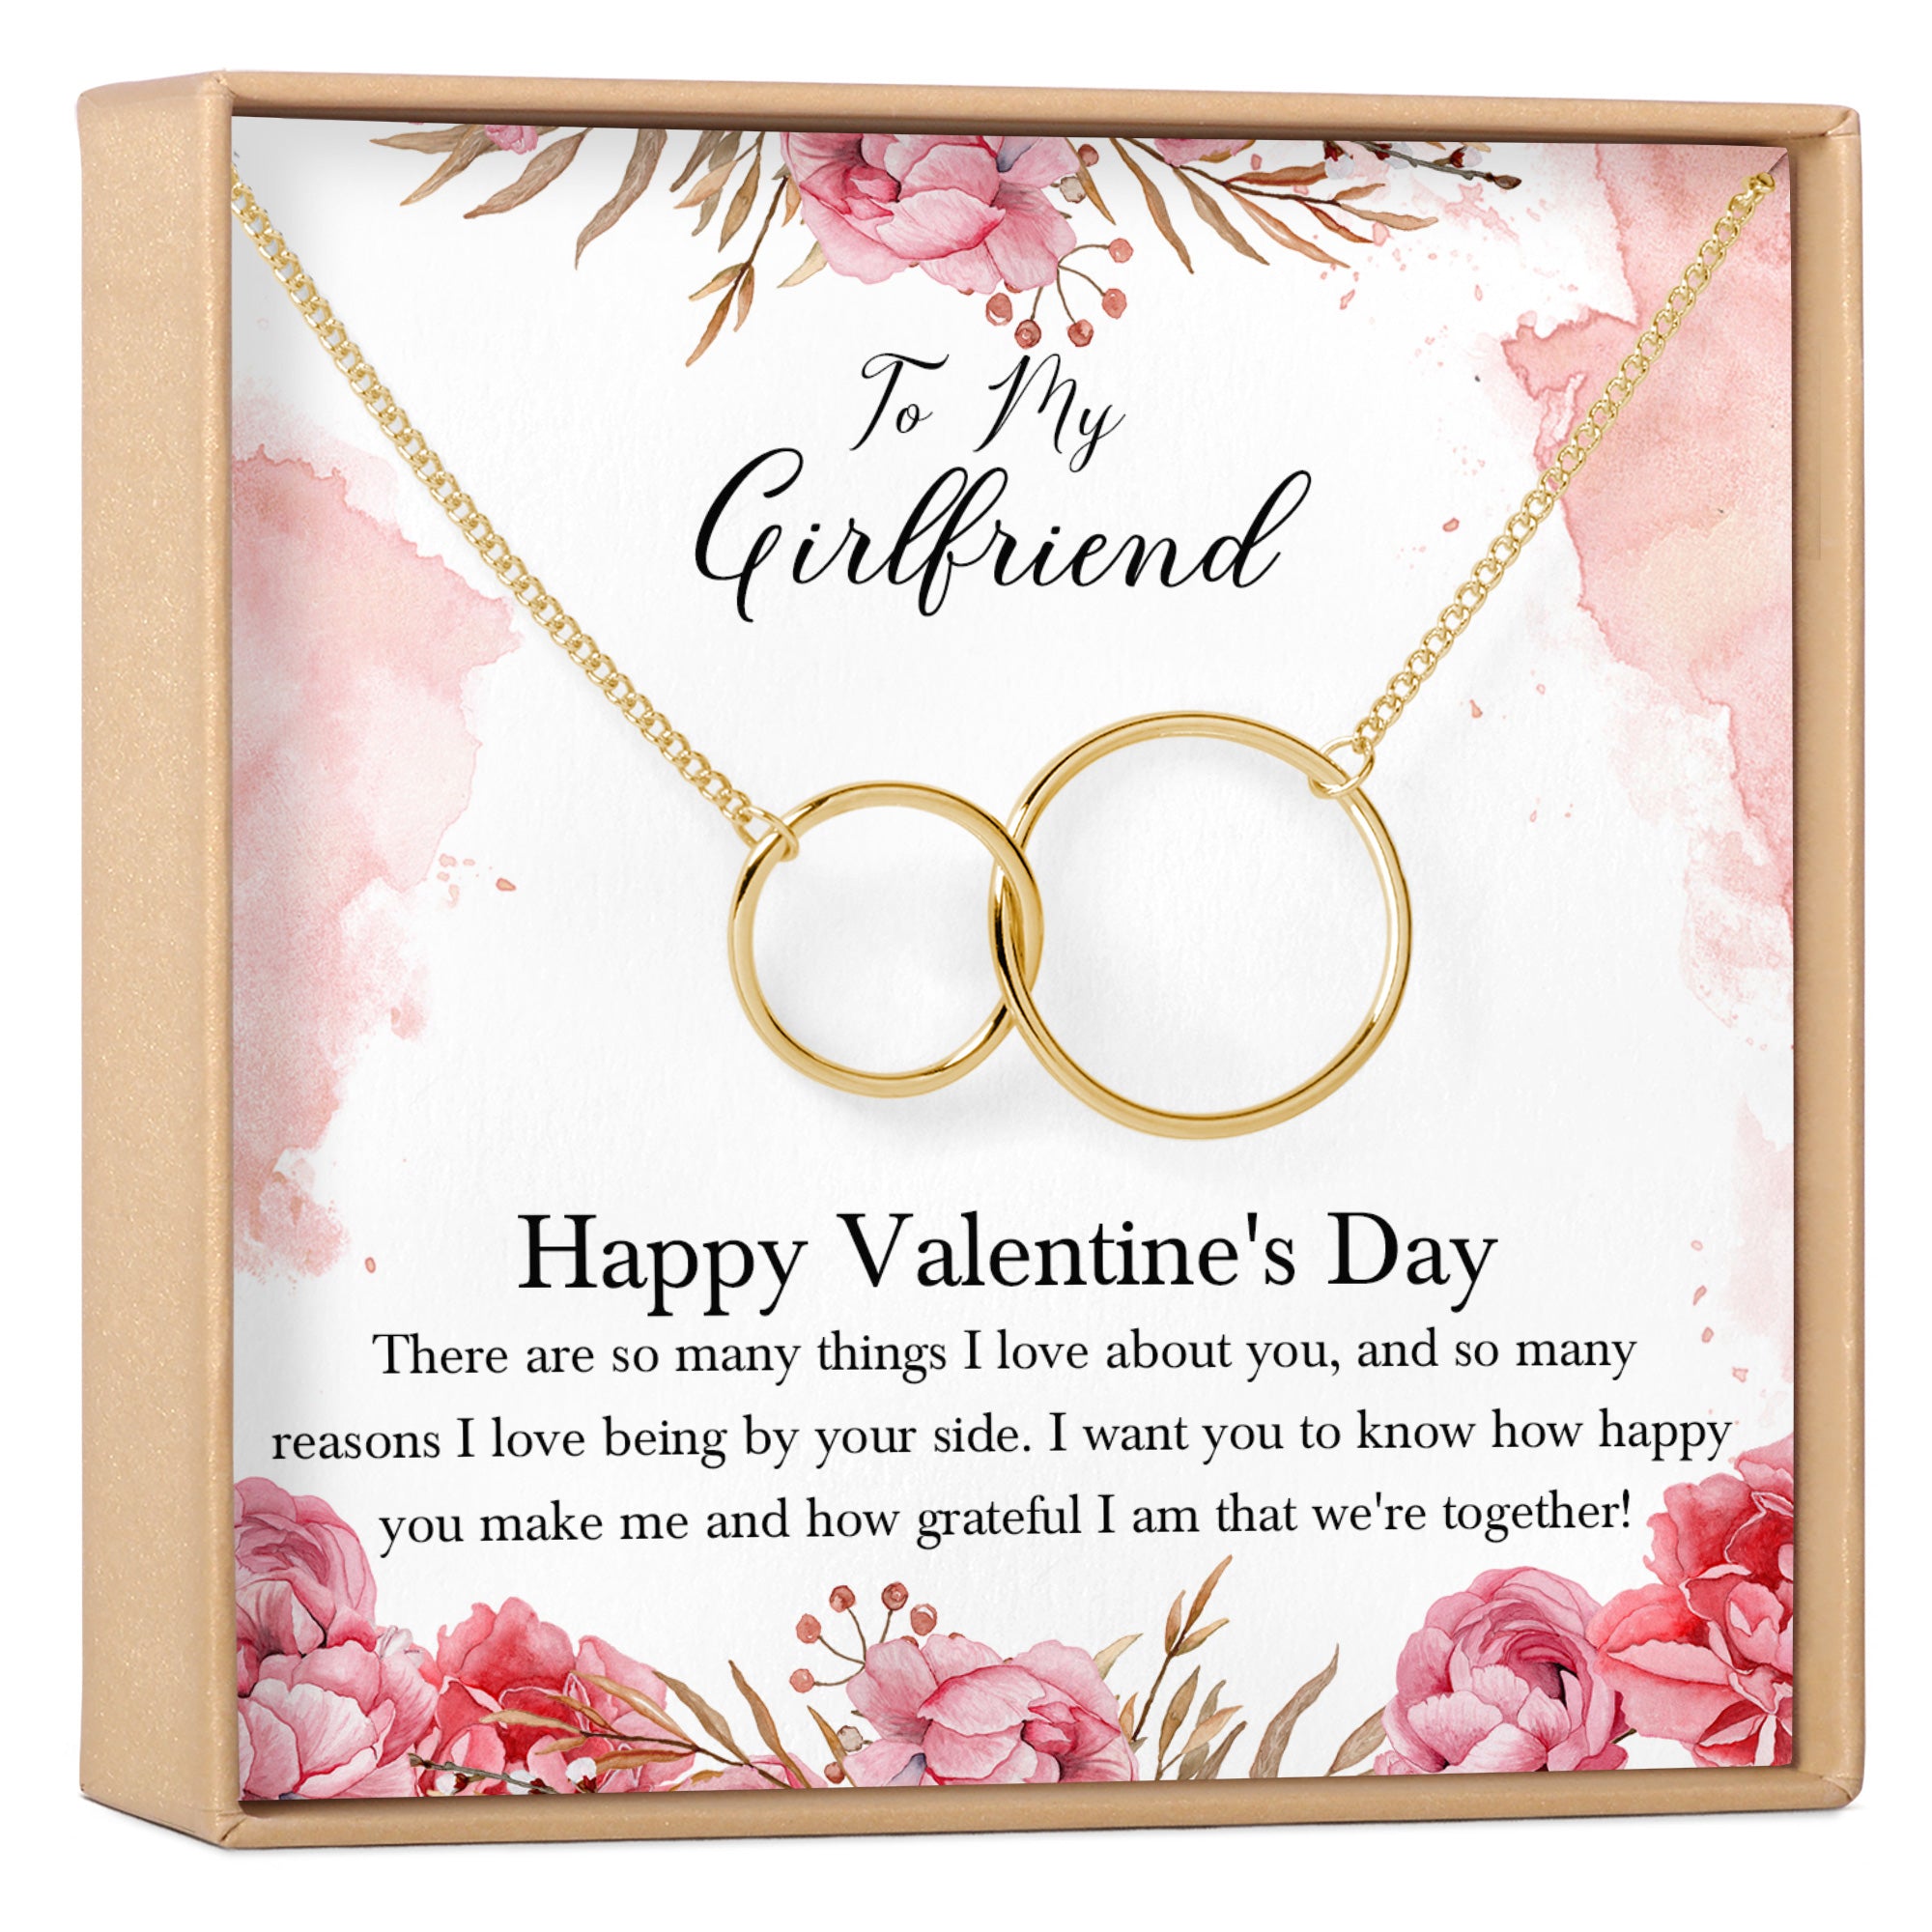 Amazon.com: Harmony Gift Valentine's gift for girlfriend romantic,  Christmas necklaces for girlfriend, things to get your girlfriend for  valentine day, Sentimental gift for girlfriend : Clothing, Shoes & Jewelry